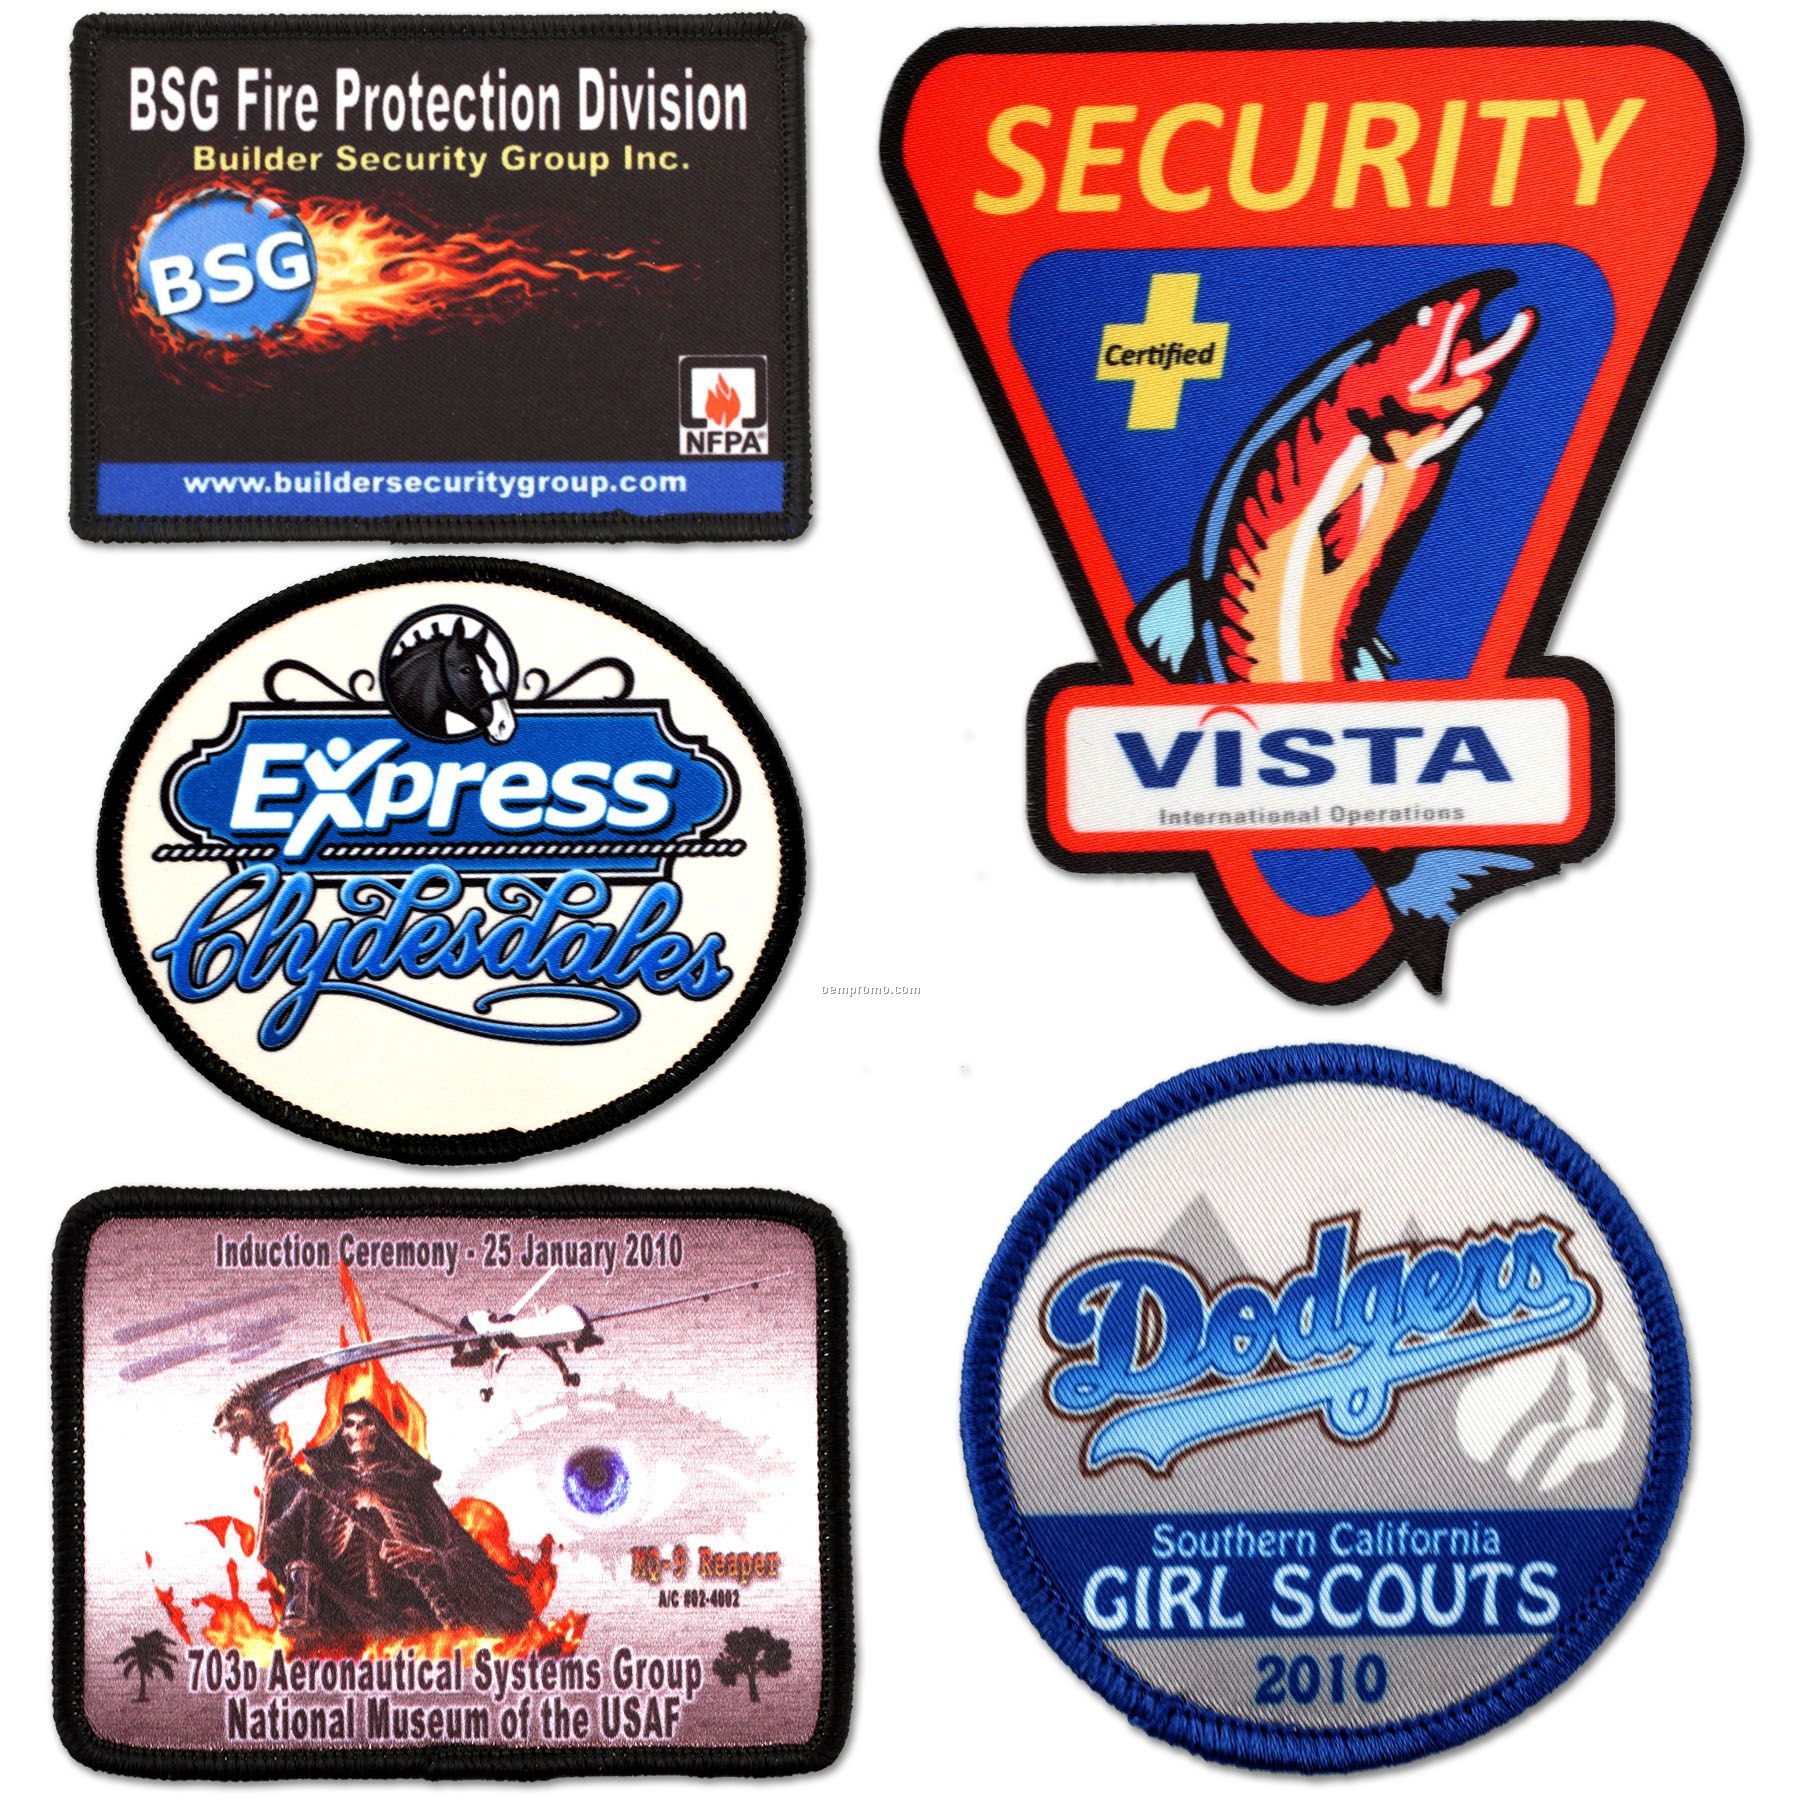 4-color Process / Sublimated Patch - 6 Sq. In.